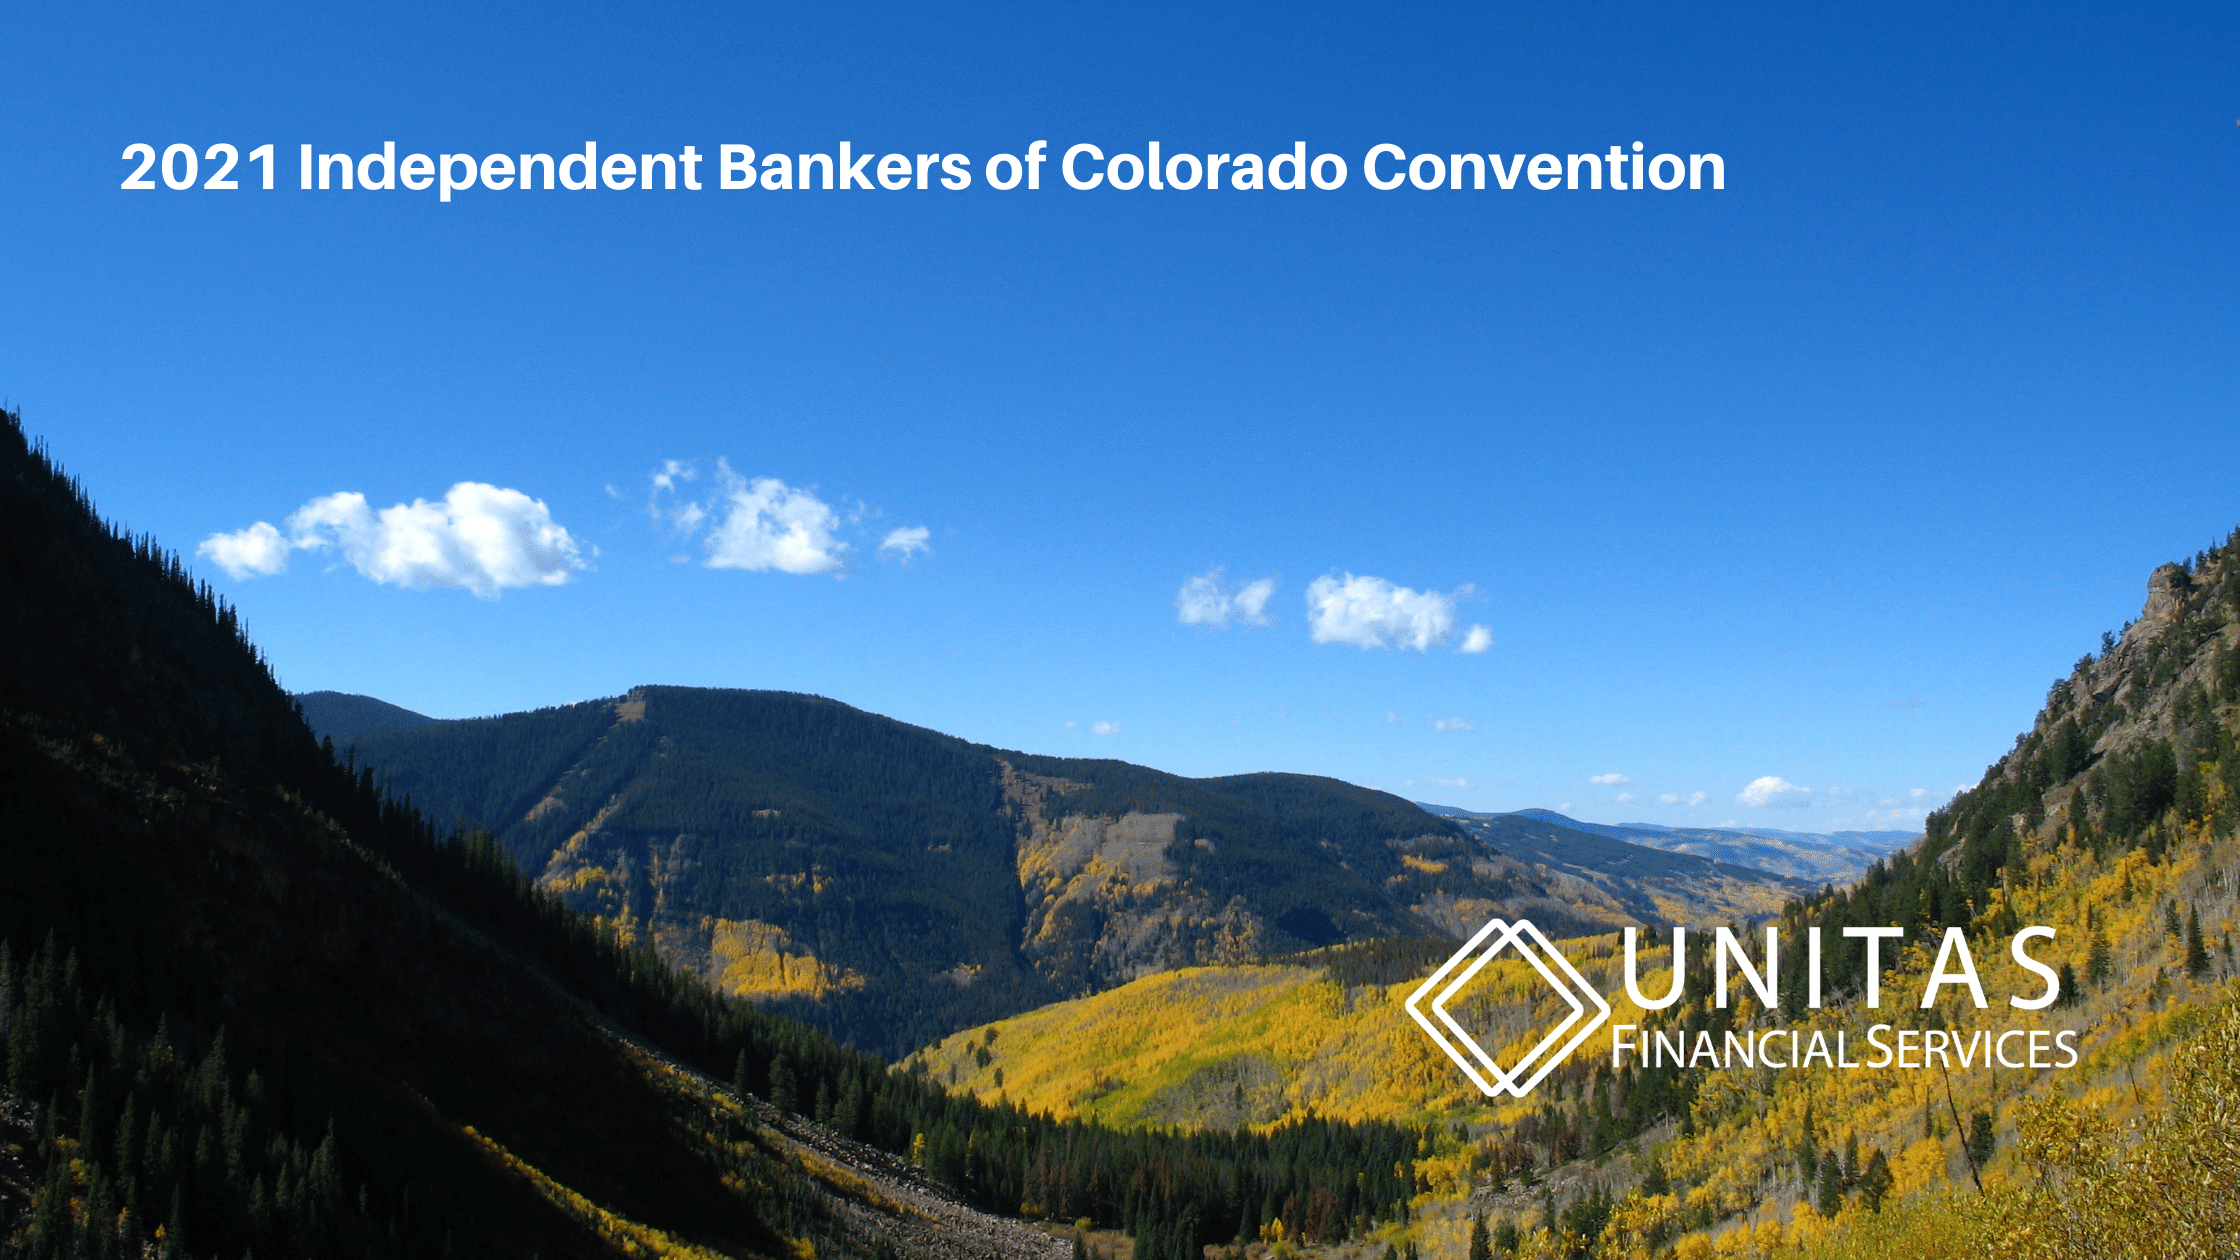 Unitas Financial Services to Attend 2021 Independent Banker of Colorado Convention